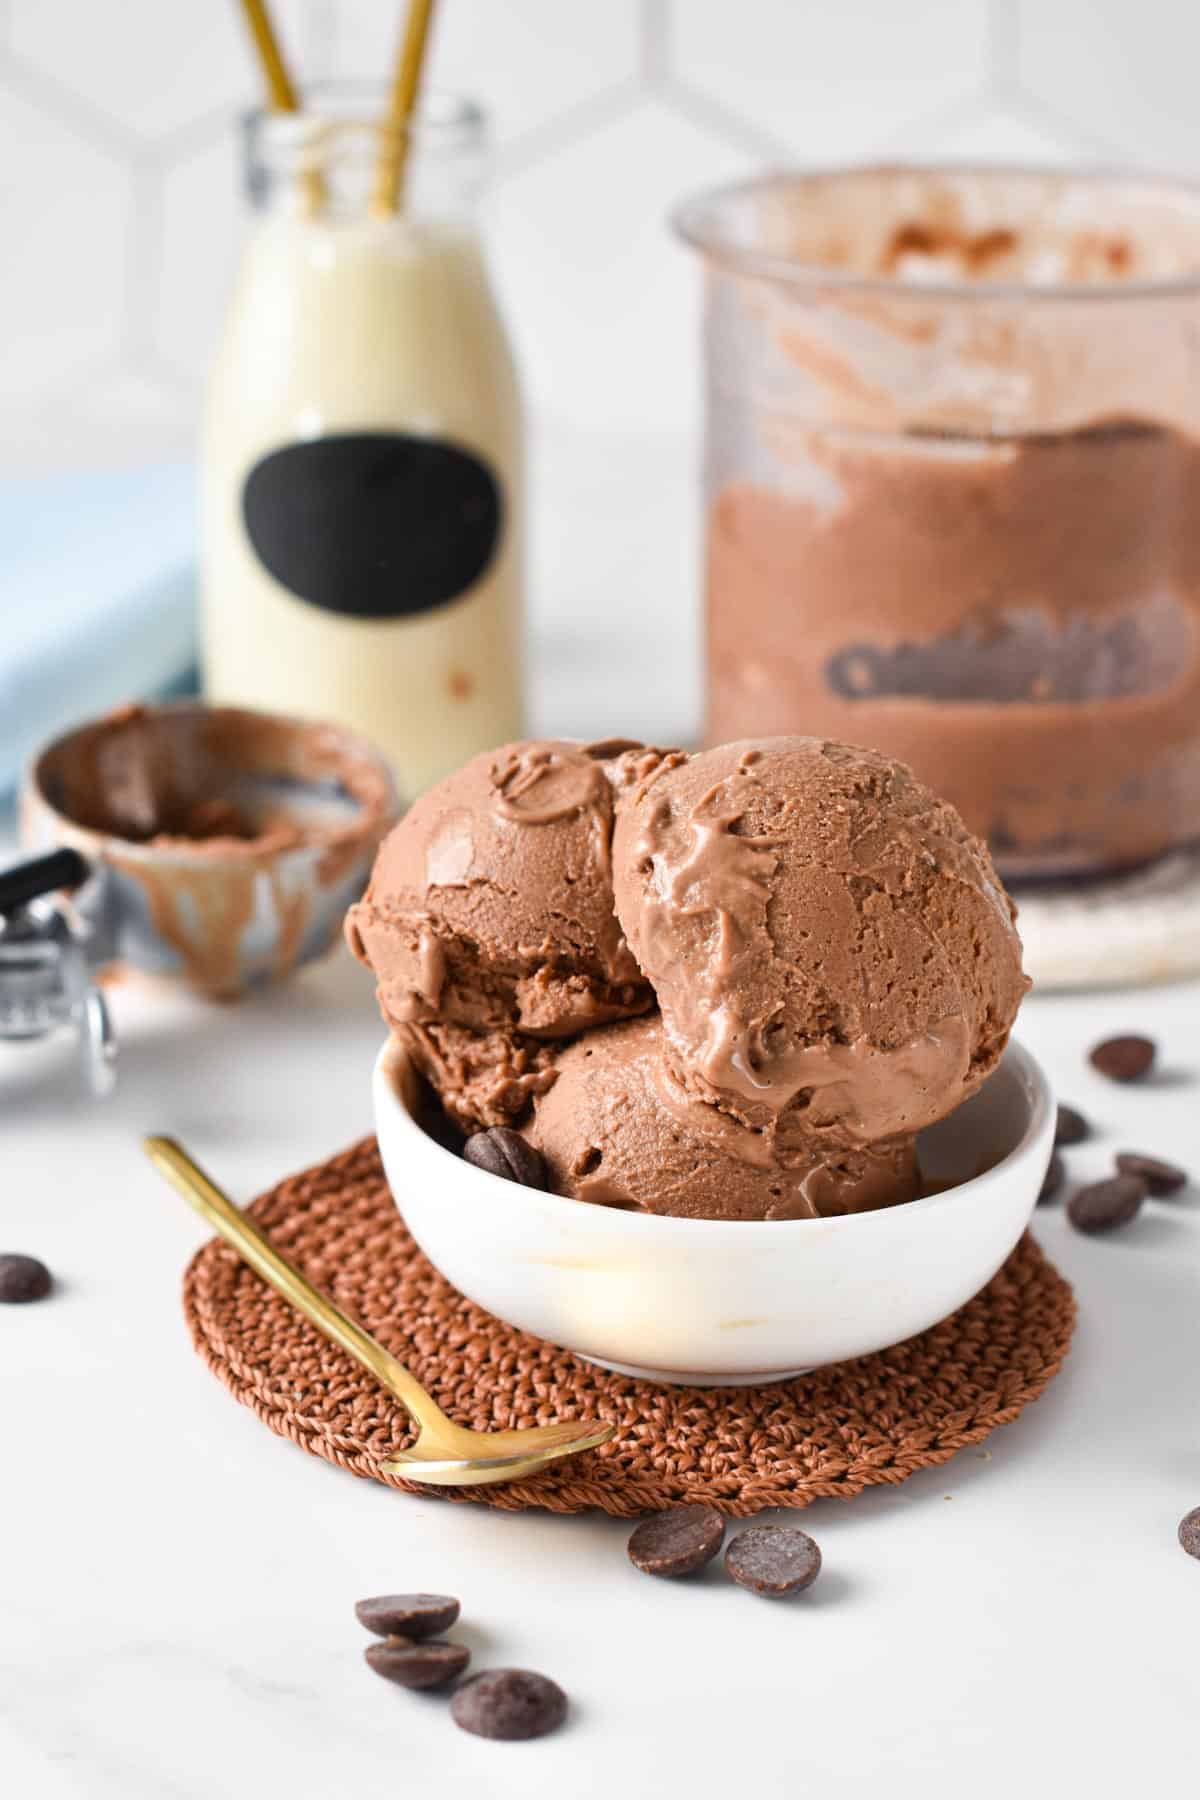 This Ninja Creami Protein Ice Cream is the easiest protein ice cream you can make this summer using the Ninja Creami ice cream maker and contains 15 grams of protein per serving. This Ninja Creami Protein Ice Cream is the easiest protein ice cream you can make this summer using the Ninja Creami ice cream maker and contains 15 grams of protein per serving. 